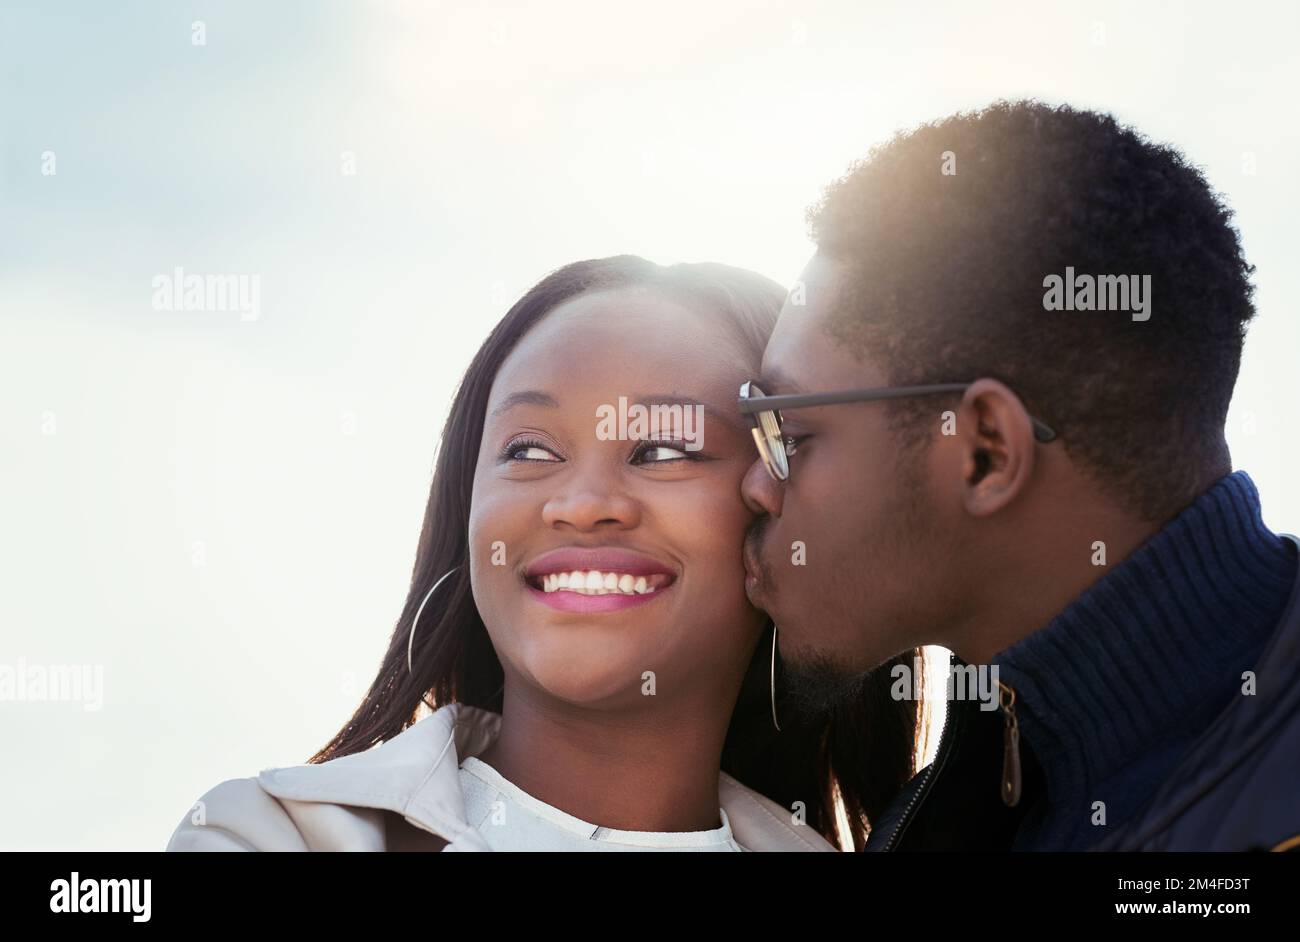 My love is all yours. an affectionate young couple bonding together outdoors. Stock Photo